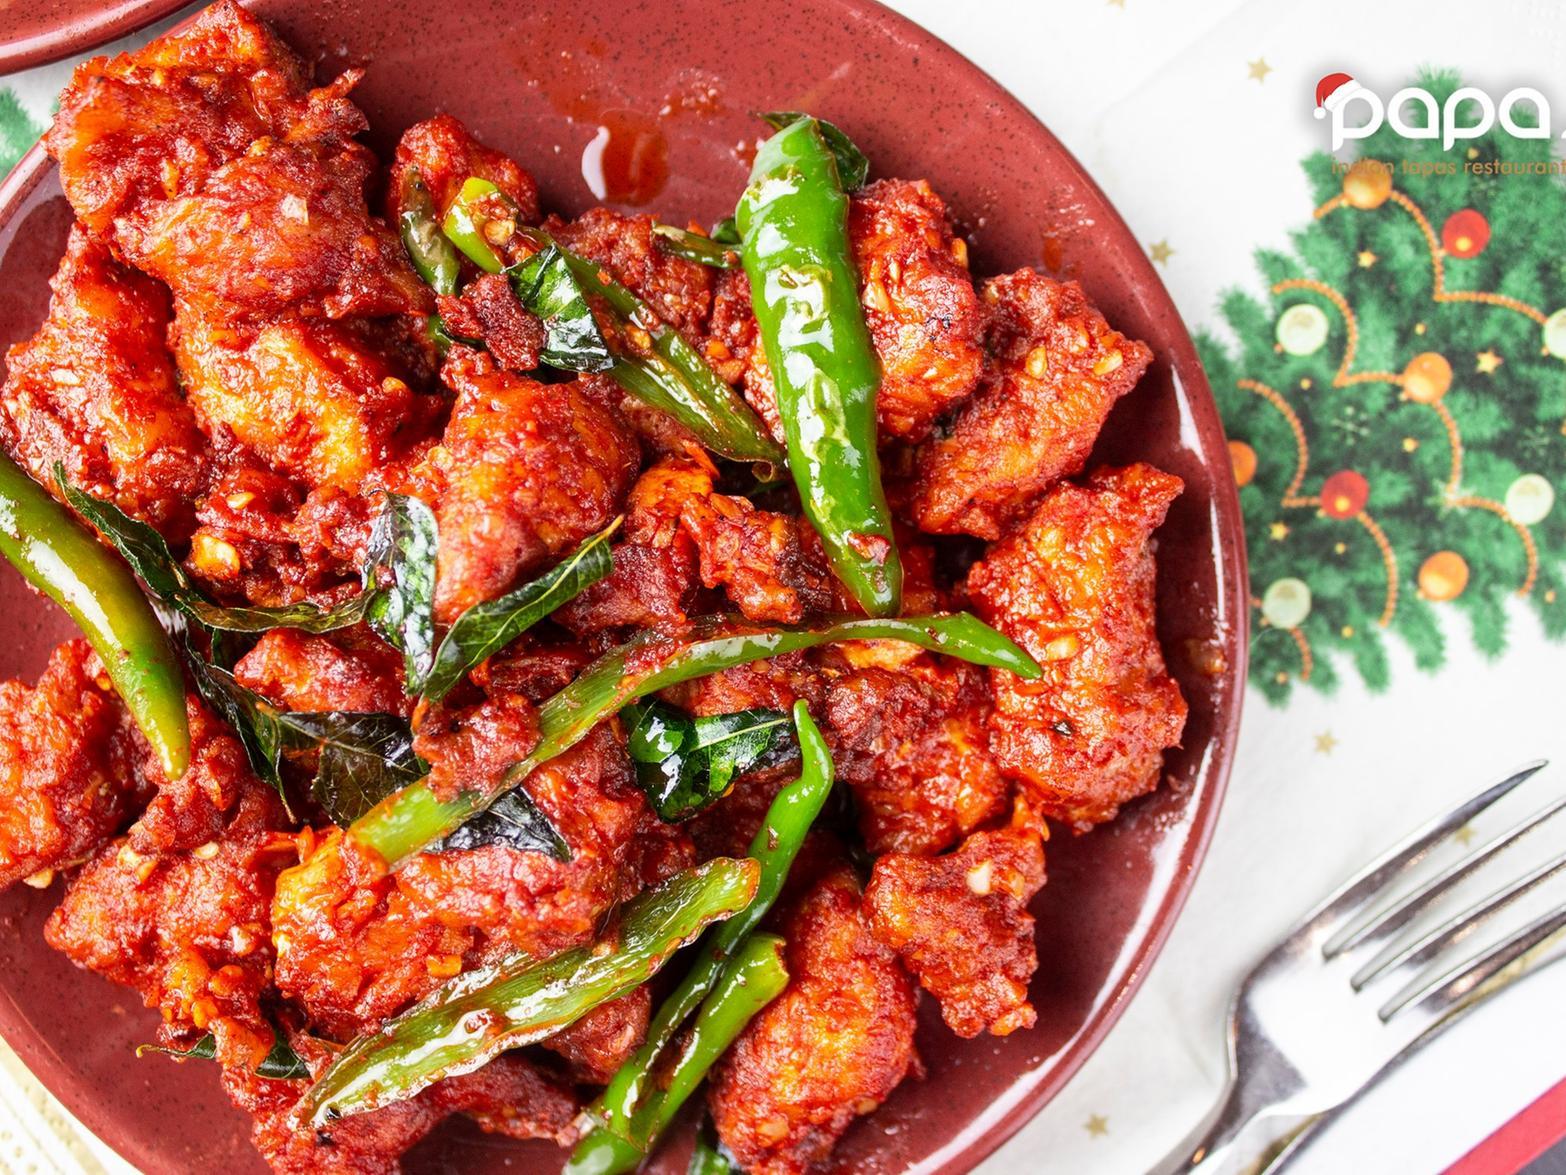 "Excellent service and food as always. Would highly recommend the chilli paneer its the best dish on the menu!" 41-43 Wellington Street, Luton, LU1 2QH